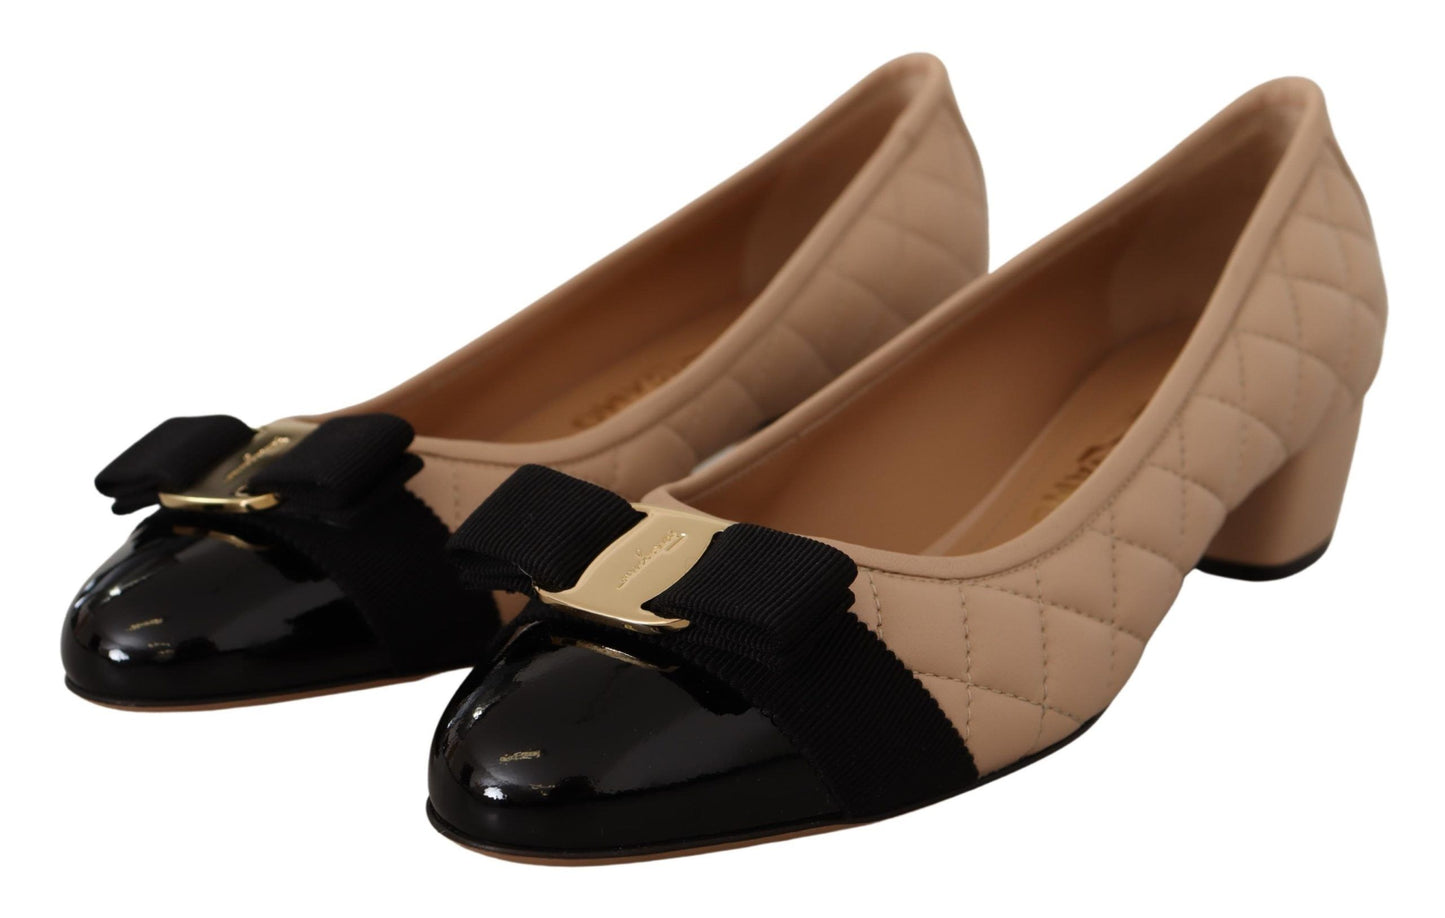 Elegant Quilted Leather Pumps in Beige and Black